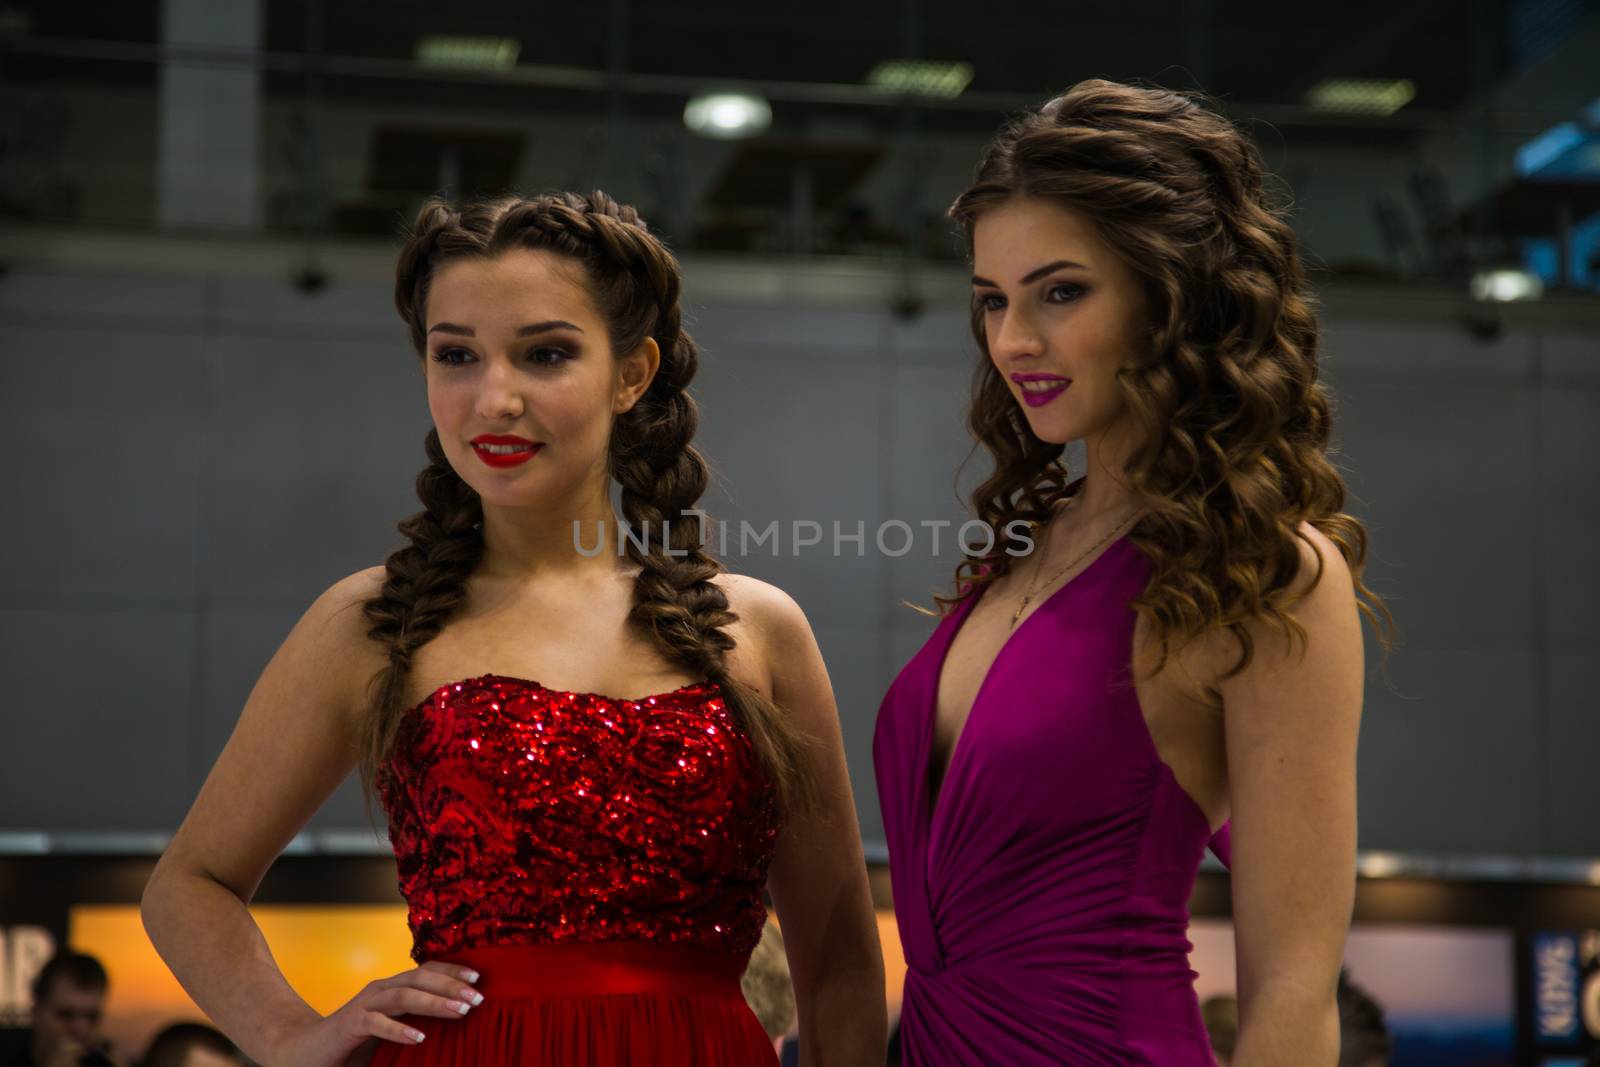 Models - brunette with braids in red and magneto 2016